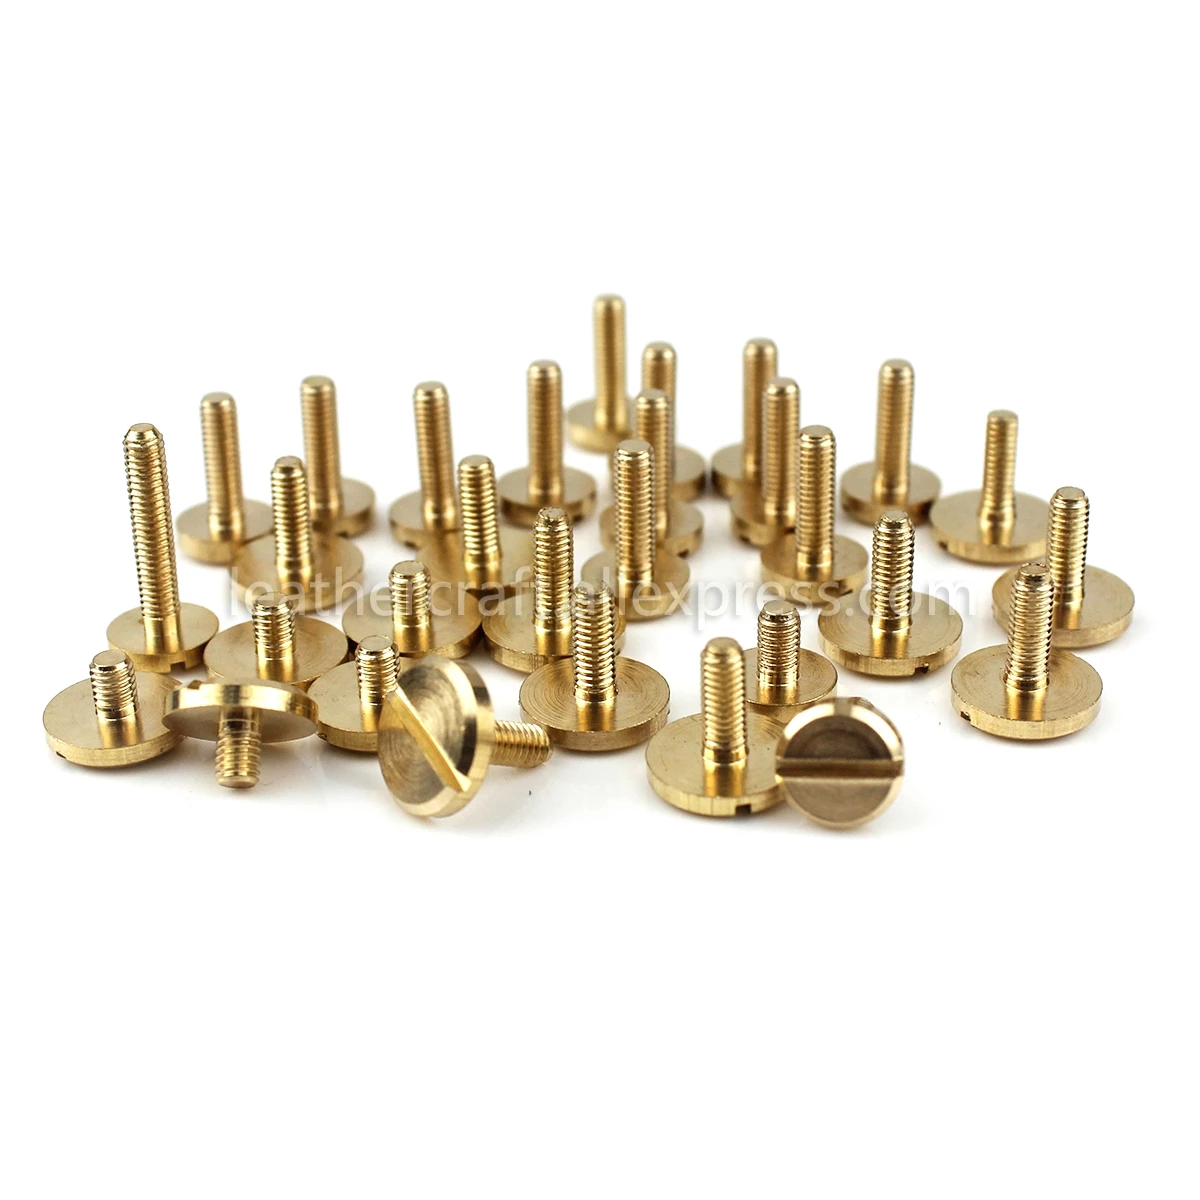 10pcs Solid Brass M3 Slotted Screws Flat Head Bolts Without Nuts Leather craft Studs Belt Fasteners  8mm/10mm cap more size